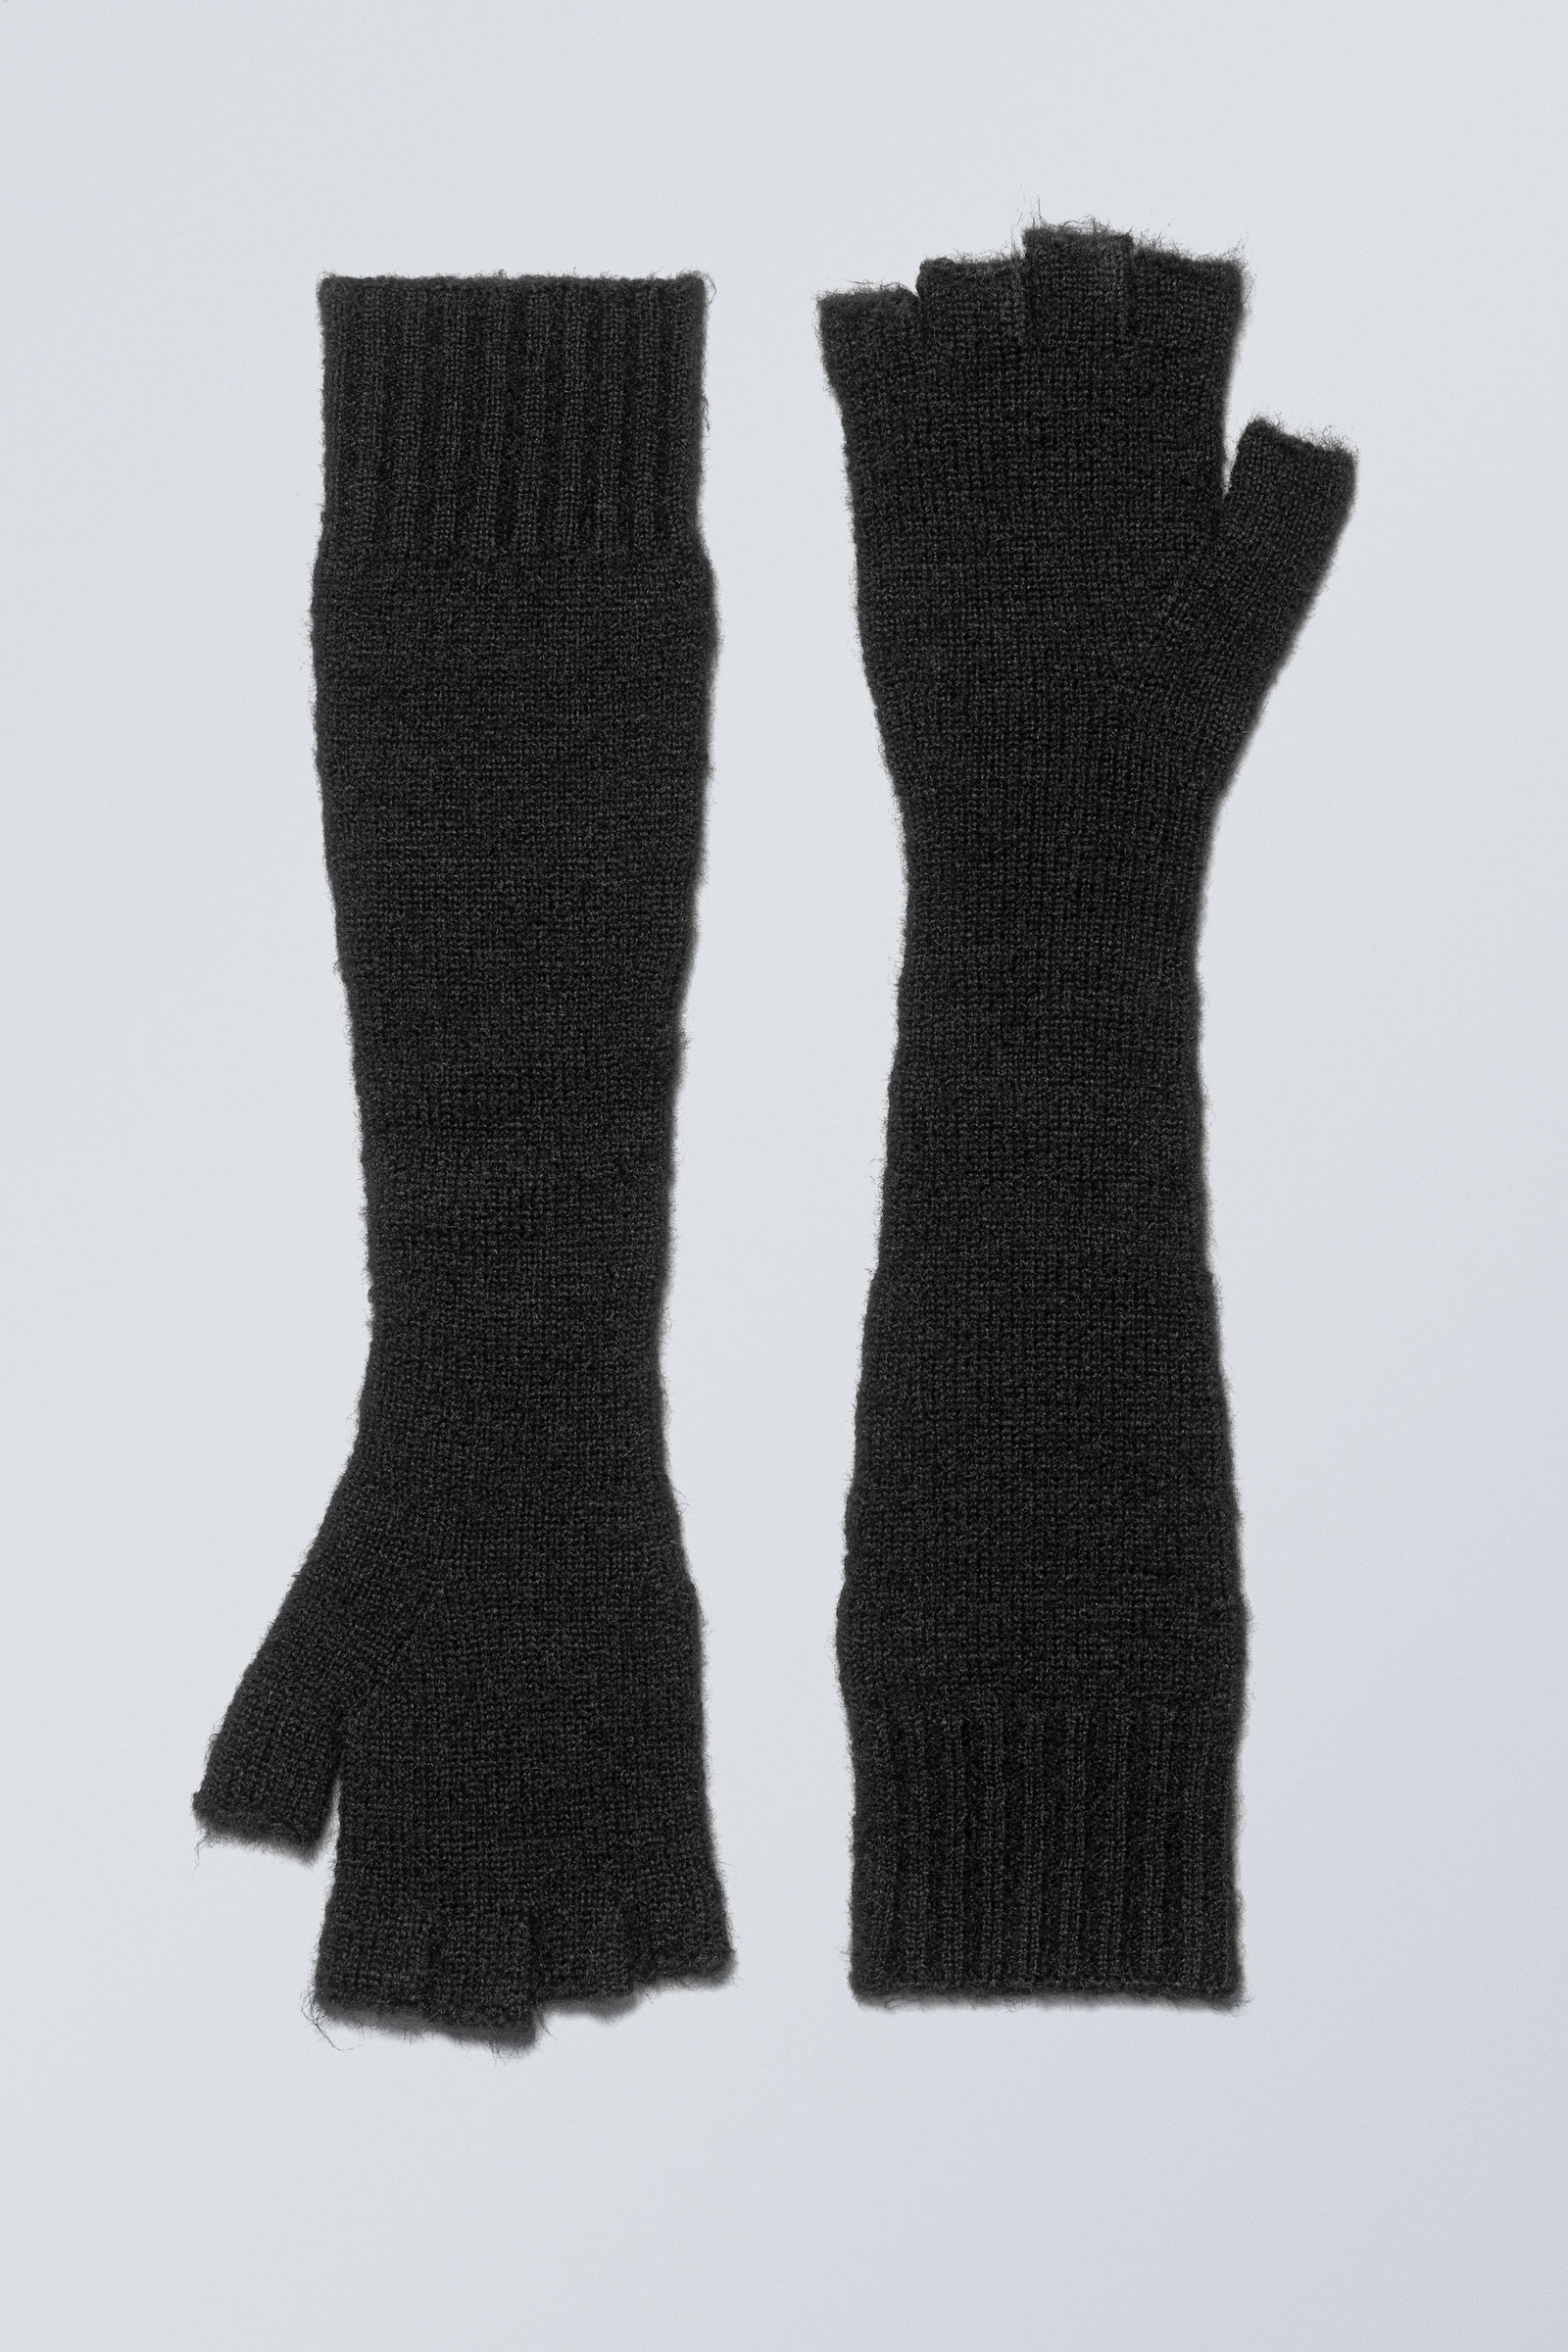 #272628 - Long Knitted Gloves